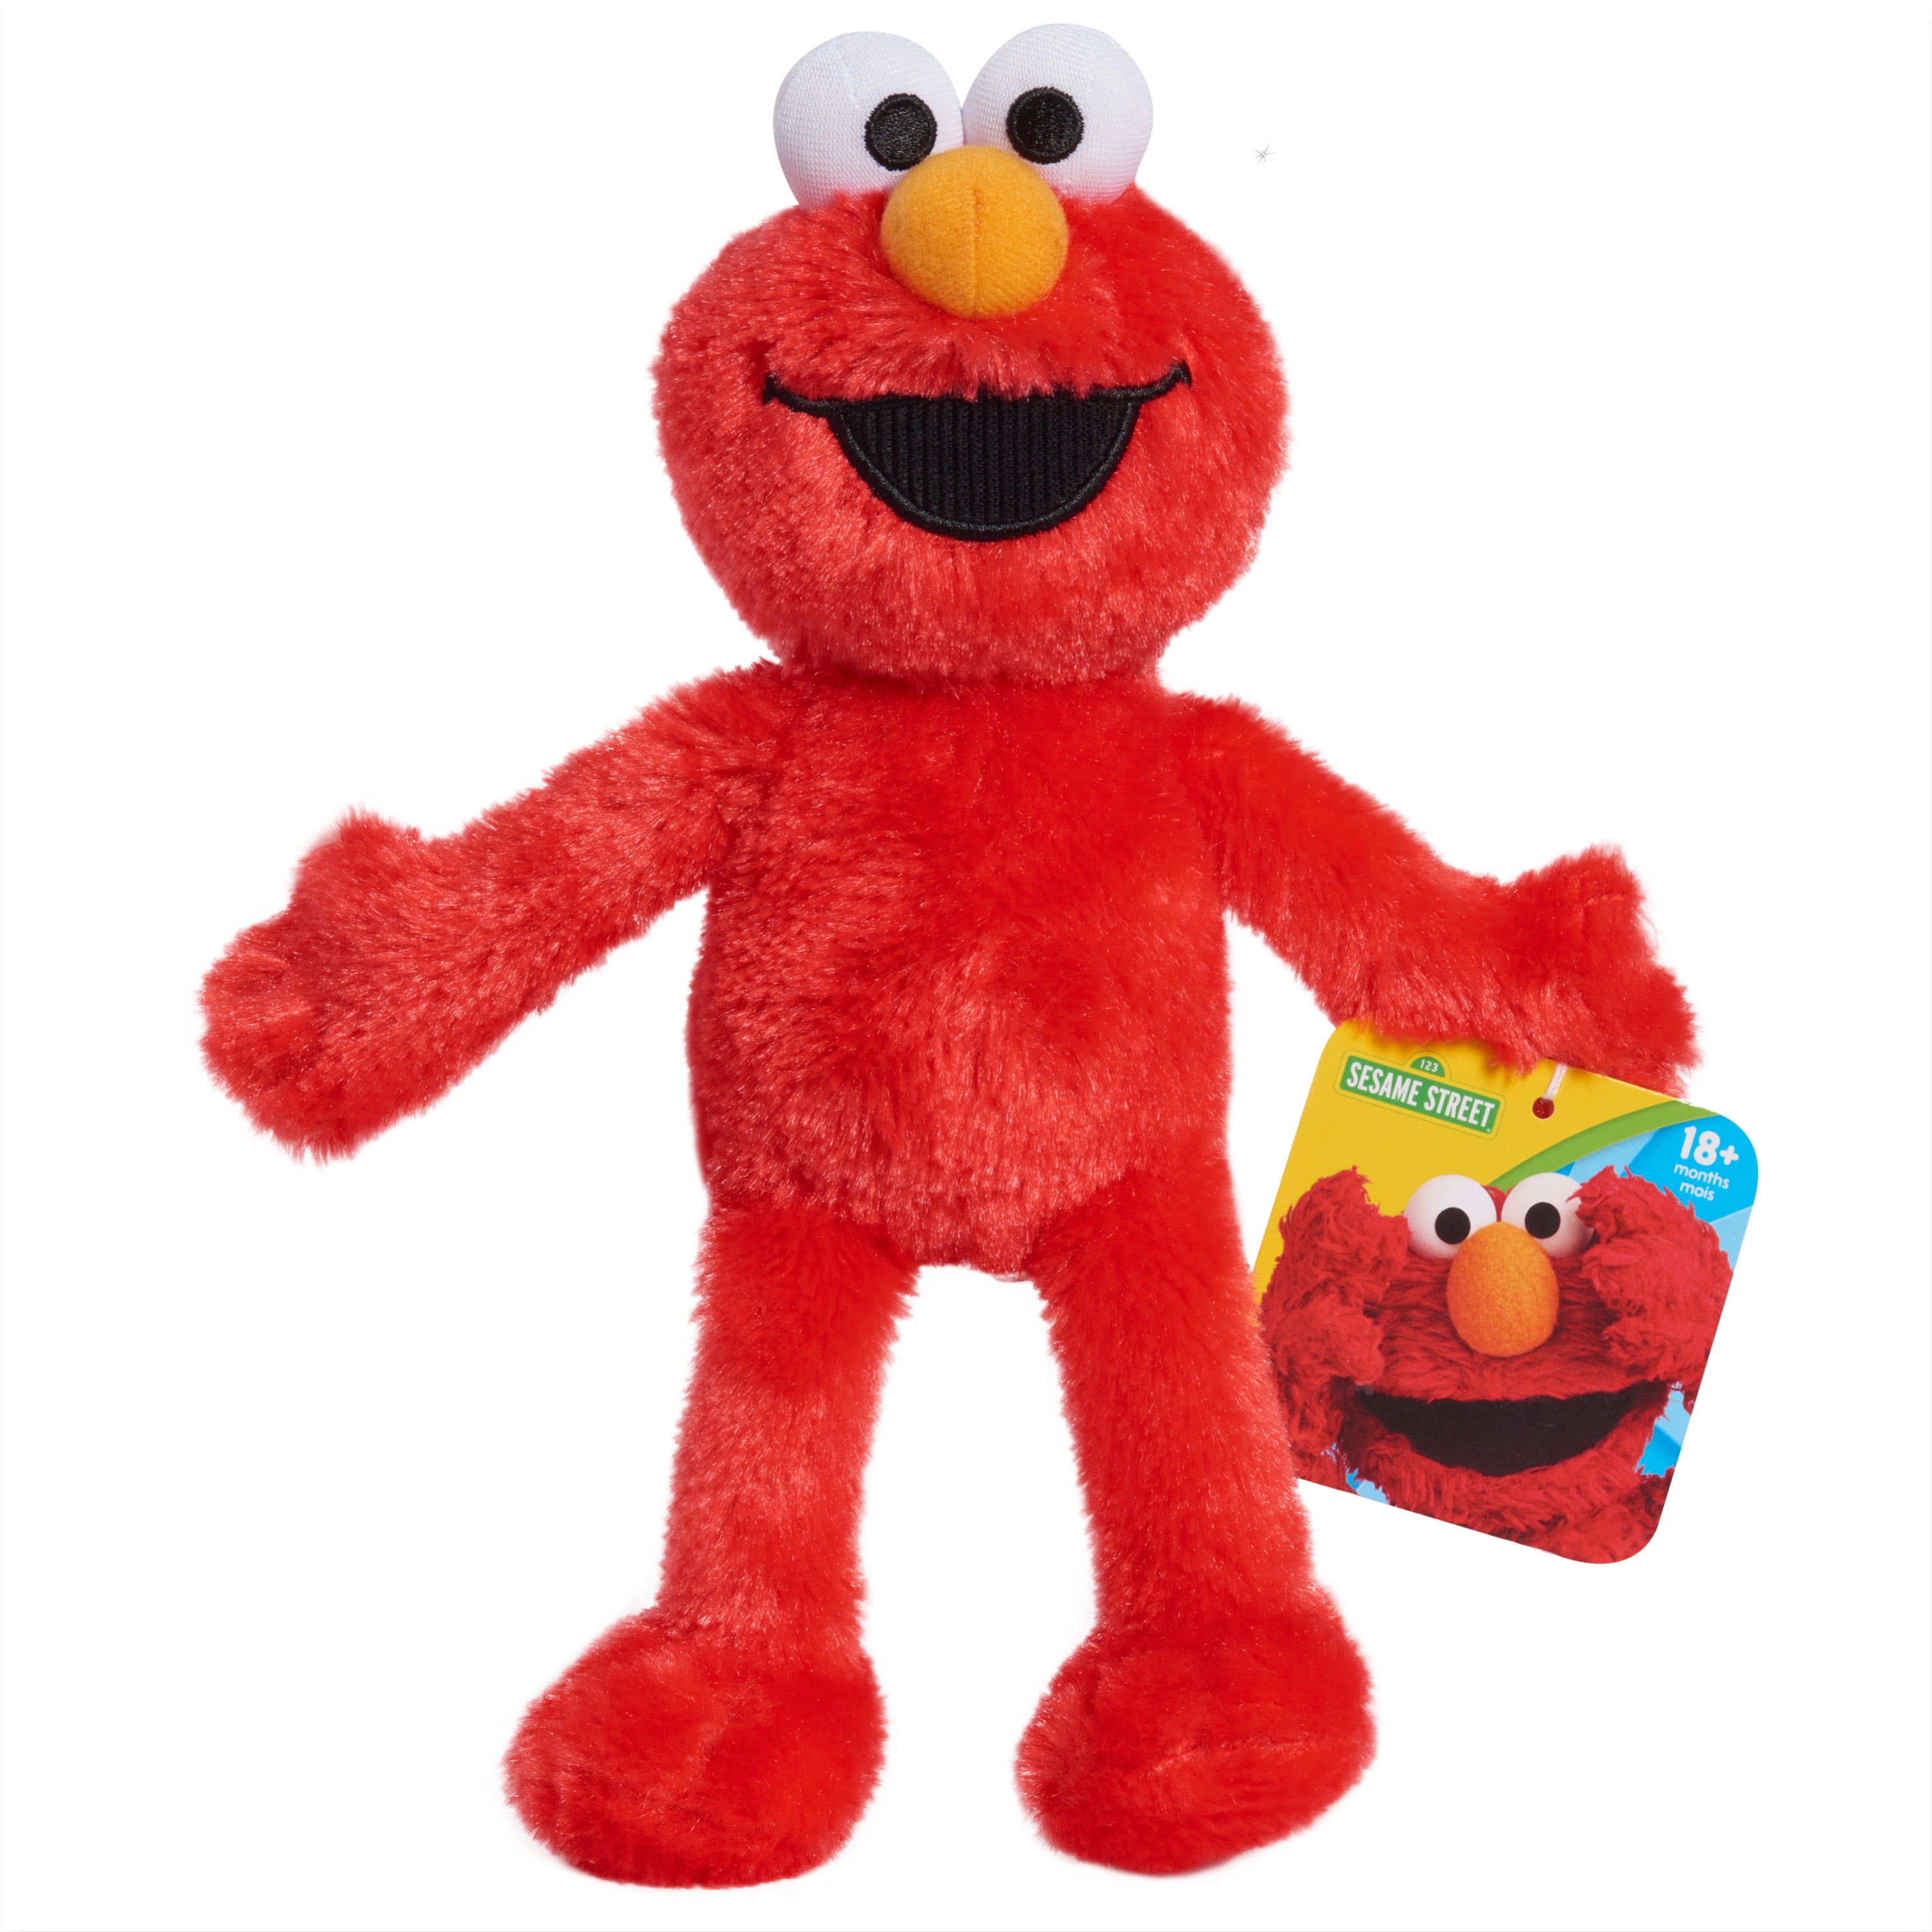 Sesame Street Friends 8-inch Elmo Sustainable Plush Stuffed Animal, Officially Licensed Kids Toys for Ages 18 Month, Gifts and Presents